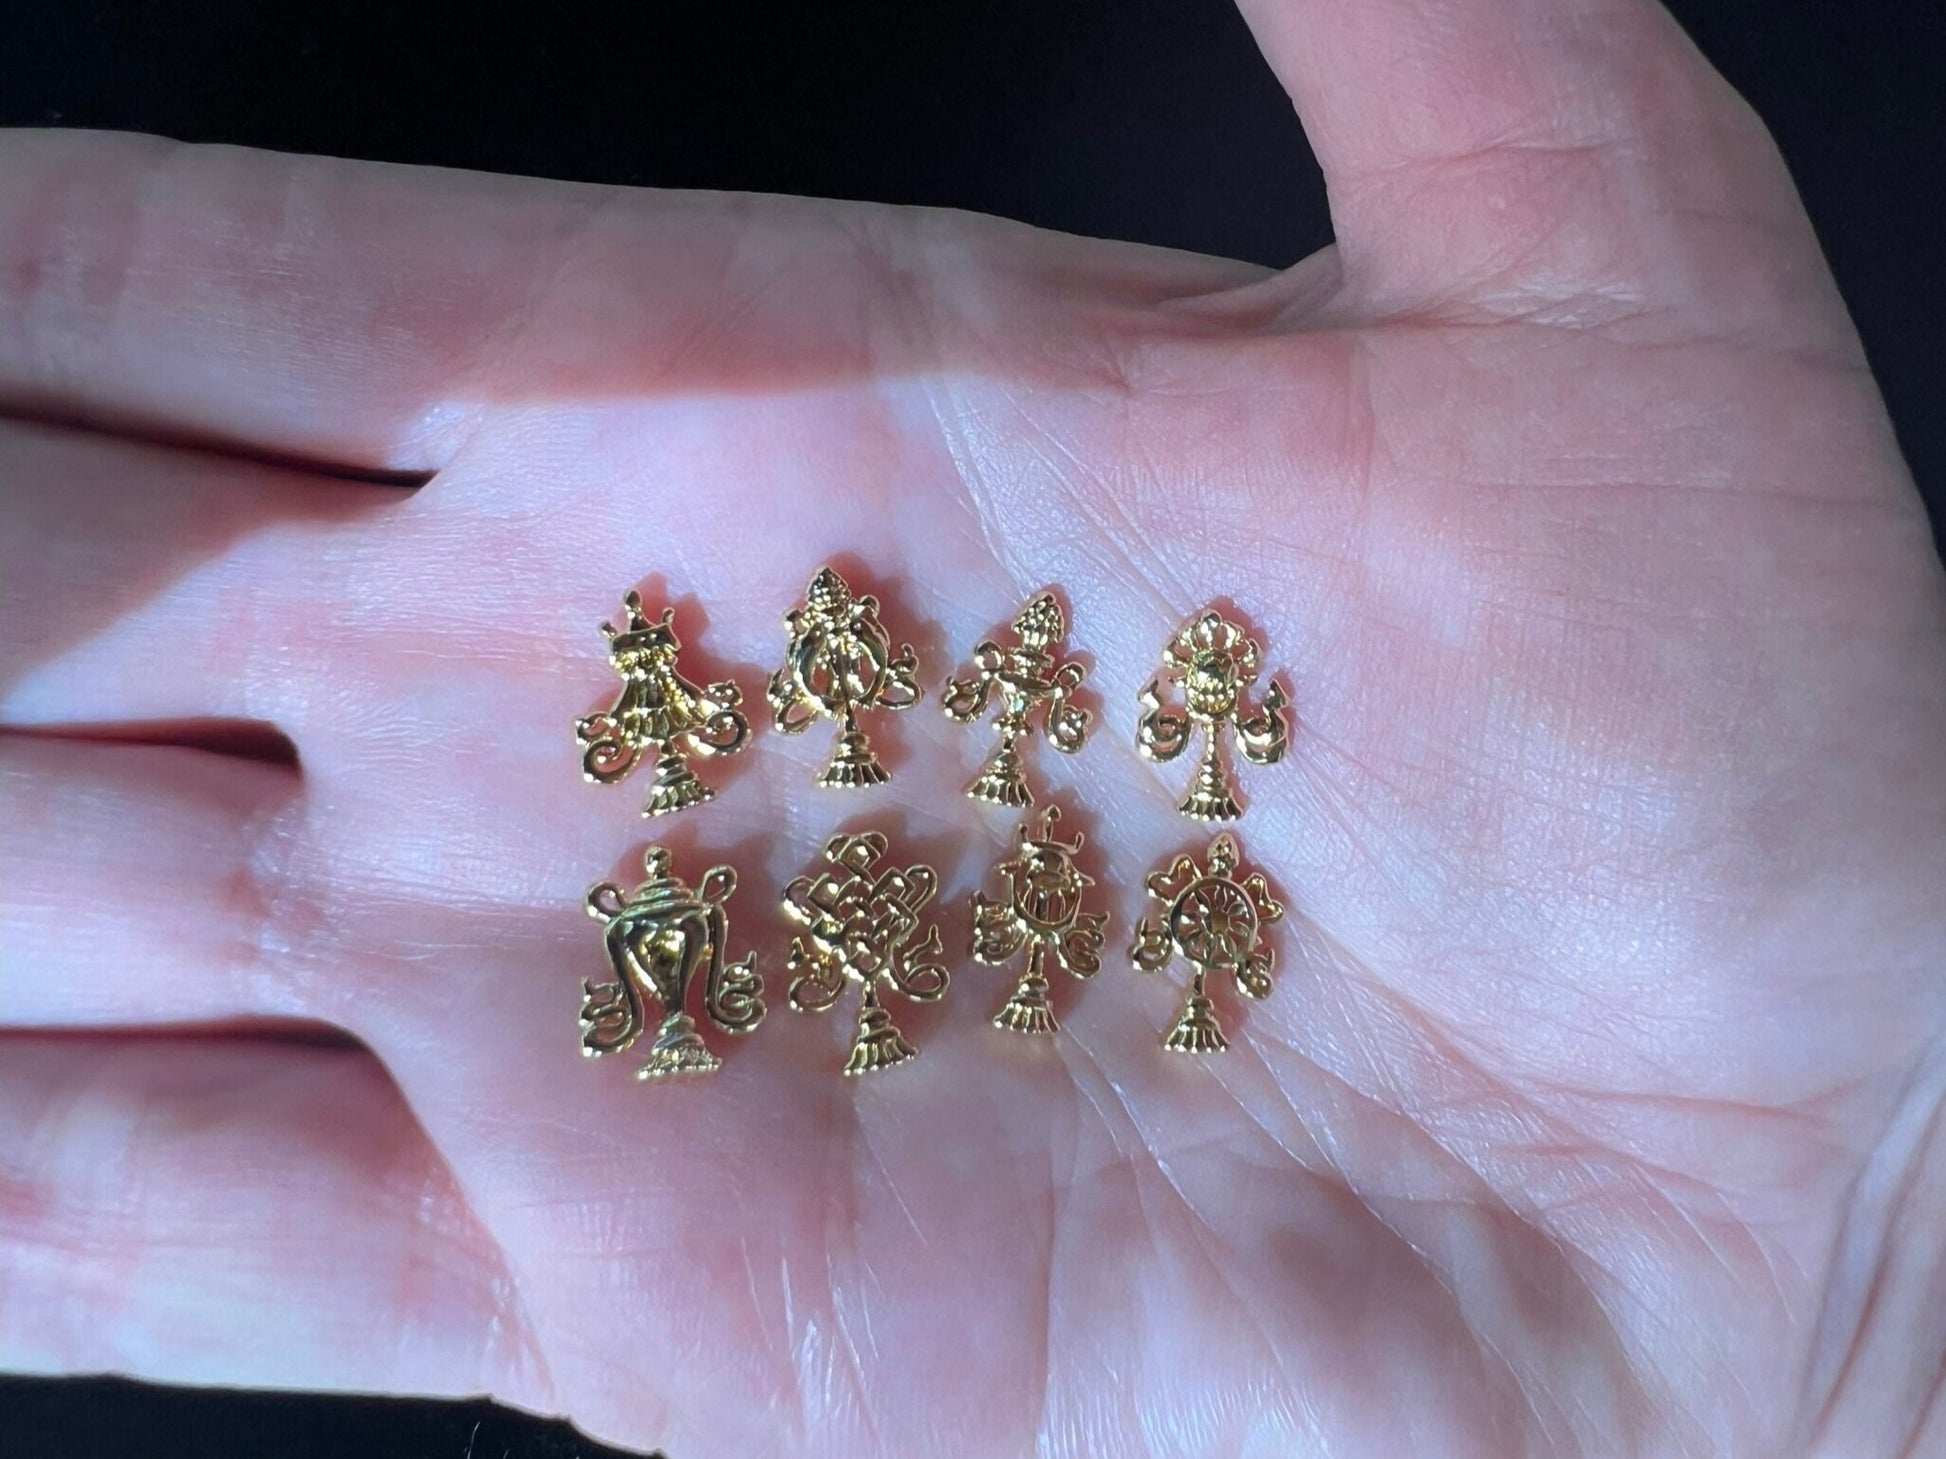 Tiny Eight Auspicious Symbols | 18 Carat Gold Gilt over 925 Sterling Silver | set of 8 symbols | Approx. 1/2 inches high | Mandala Offering